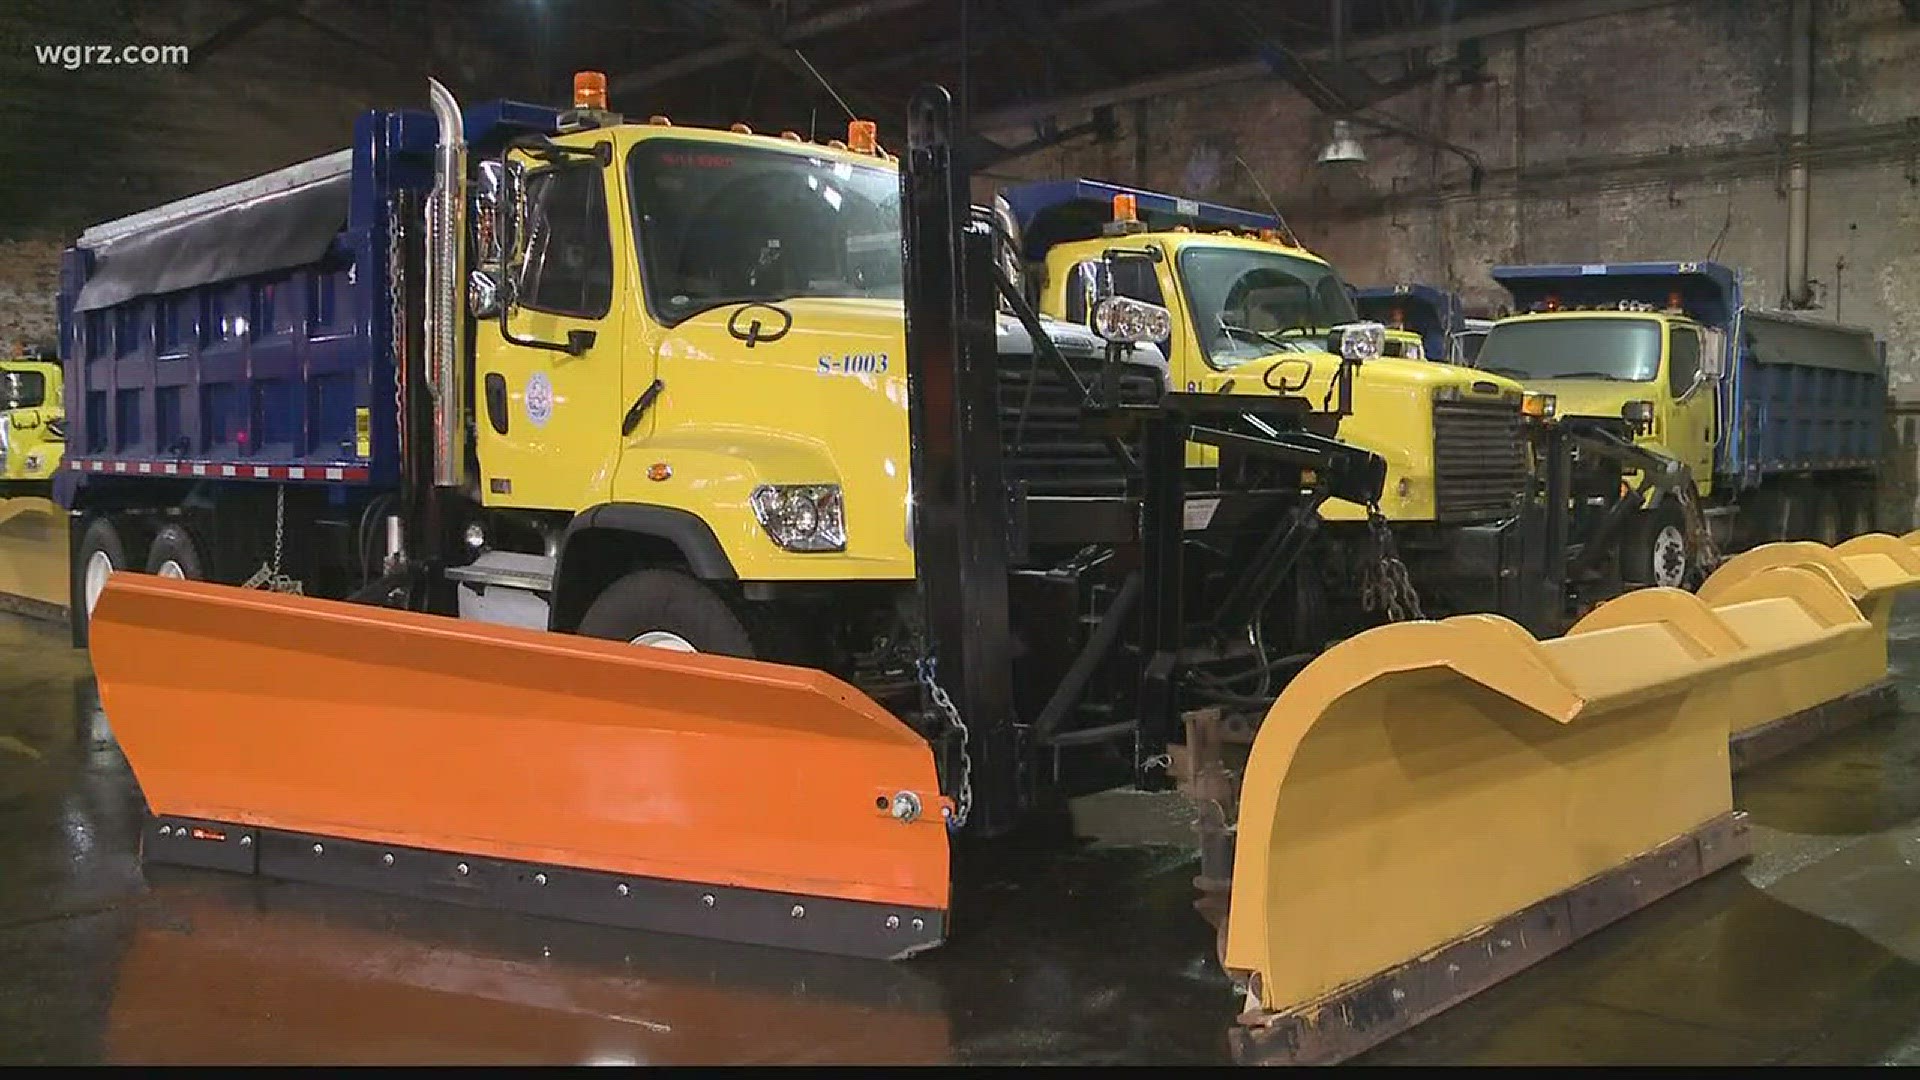 Snow Preps: City Of Buffalo Buys New Plows For The Winter